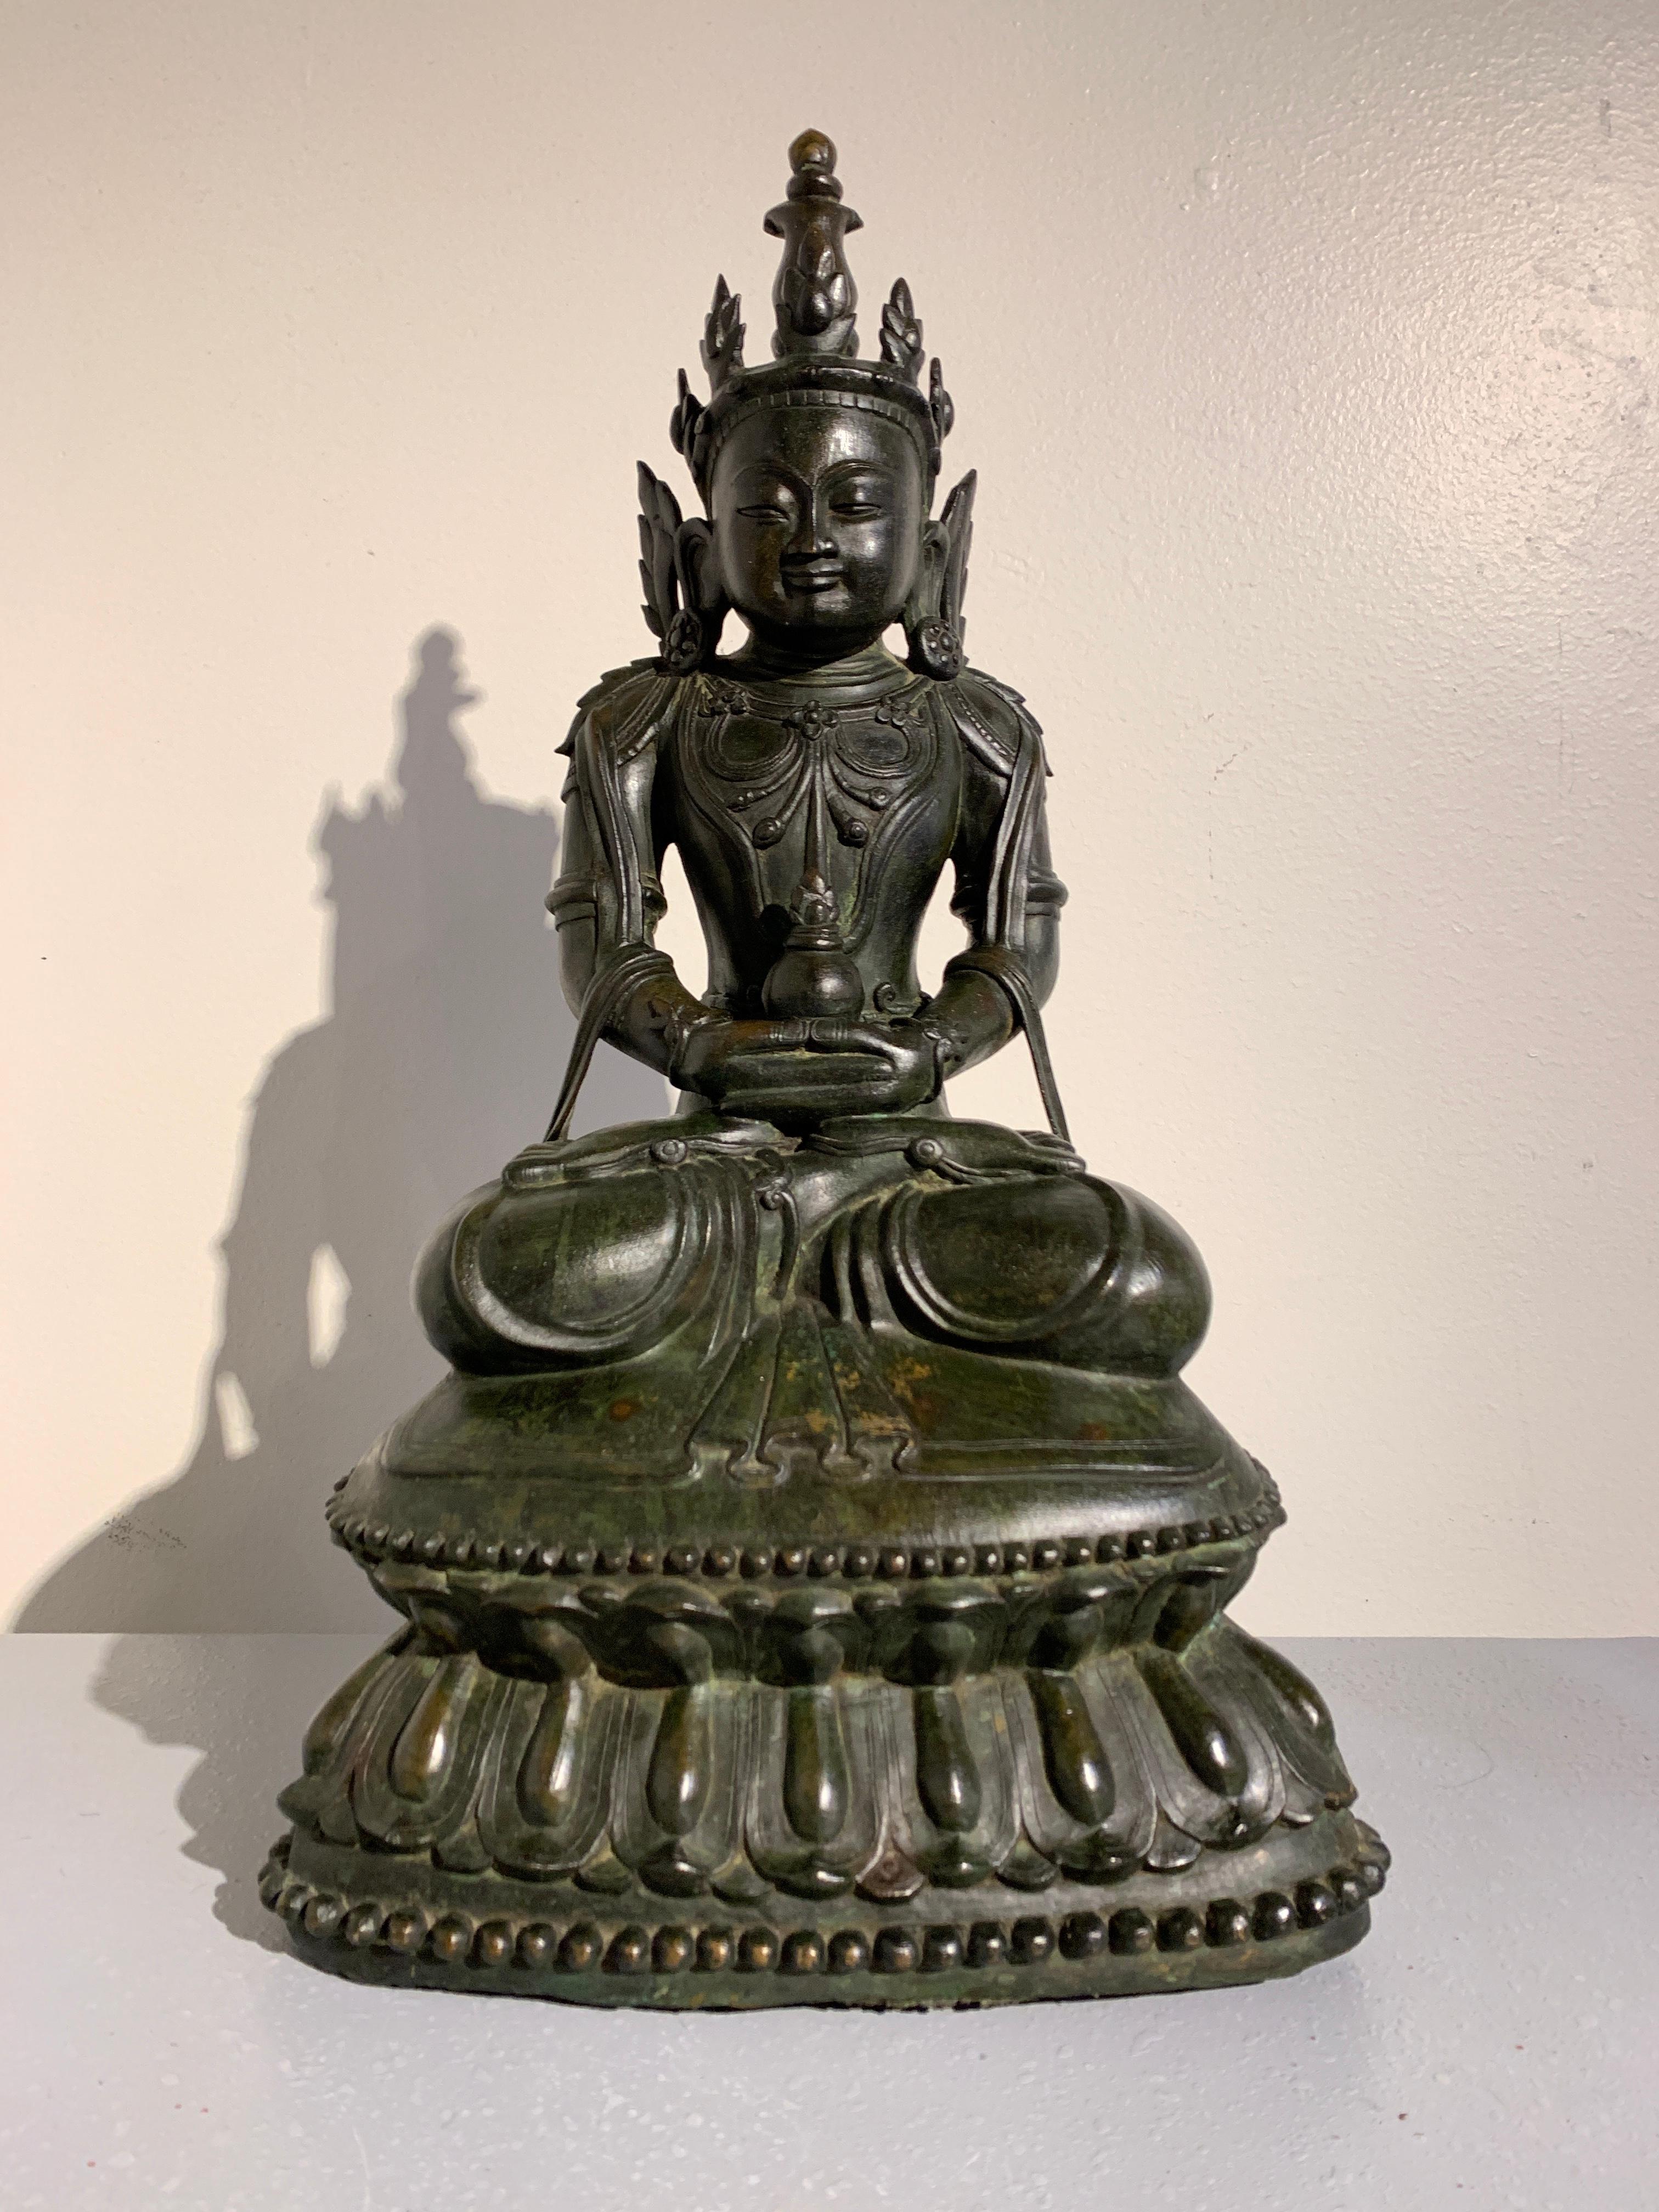 A gorgeous and refined Burmese crowned and adorned seated bronze Buddha, Kingdom of Arakan, Mrauk-U period, 17th century. 

The Buddha is portrayed seated in vajrasana upon a high double lotus pedestal, hands in dhyana mudra, a ritual vessel resting